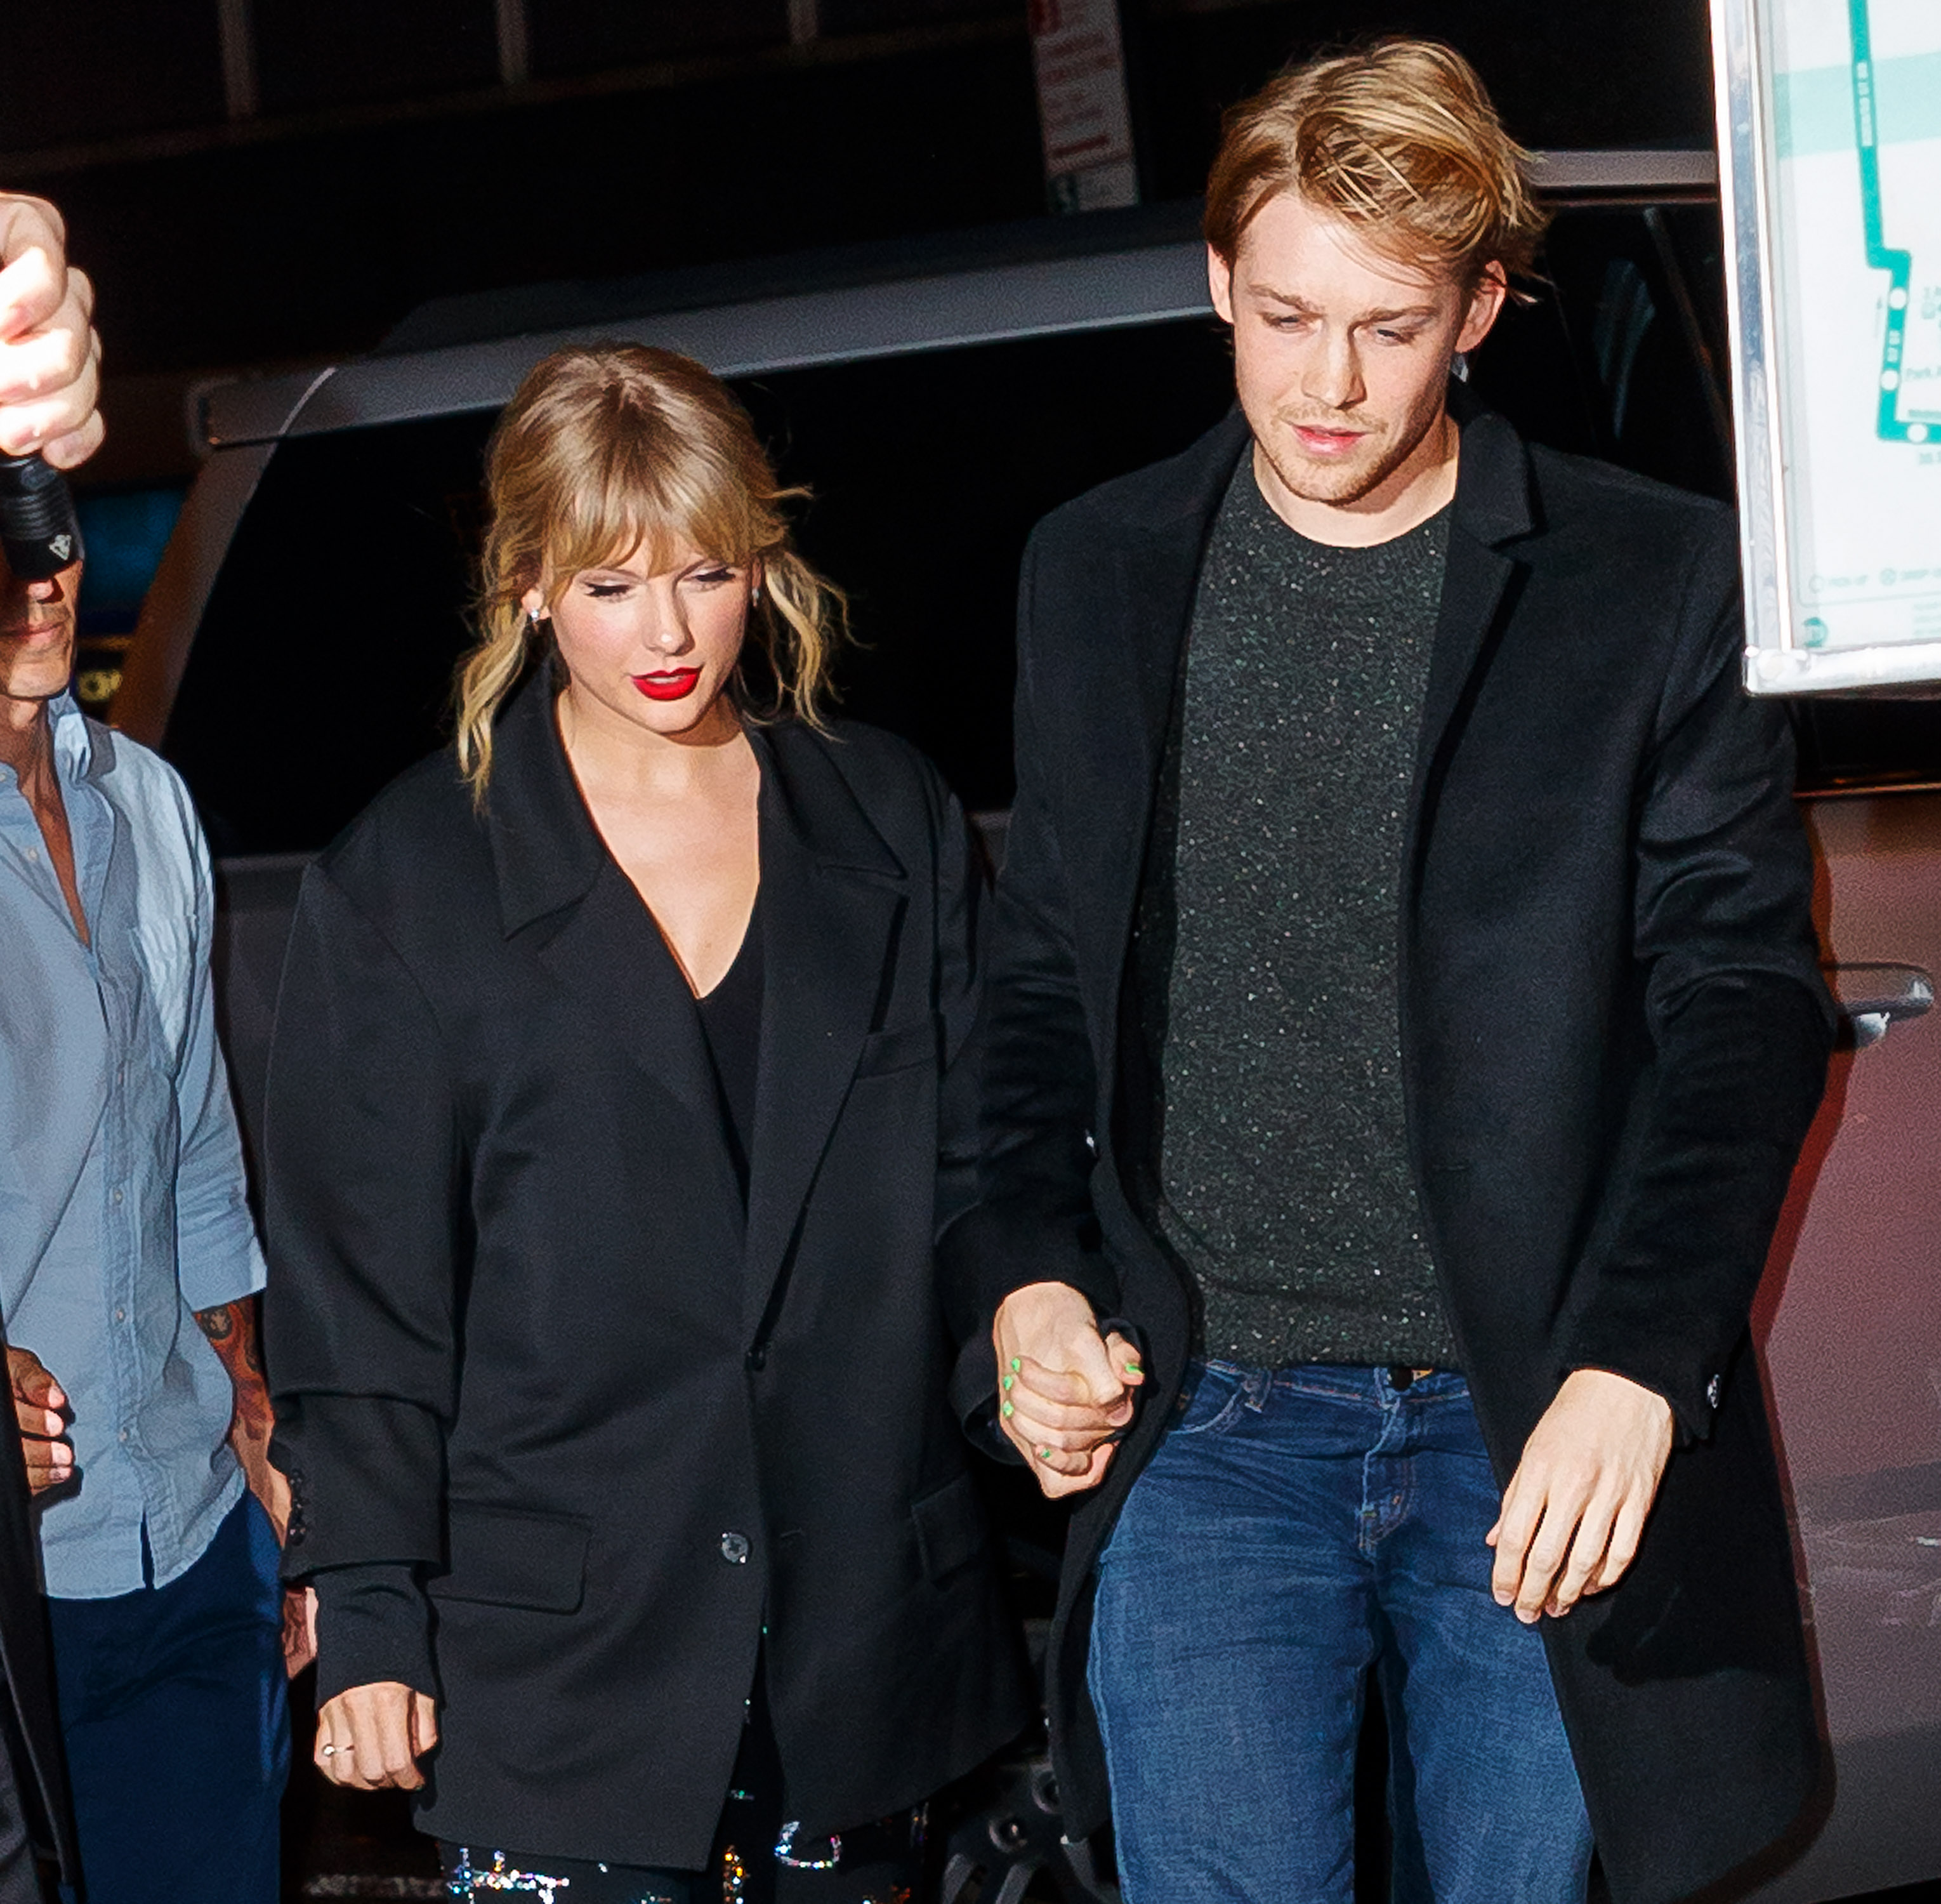 Taylor and Joe Alwyn managed to keep their six-year relationship out of the spotlight